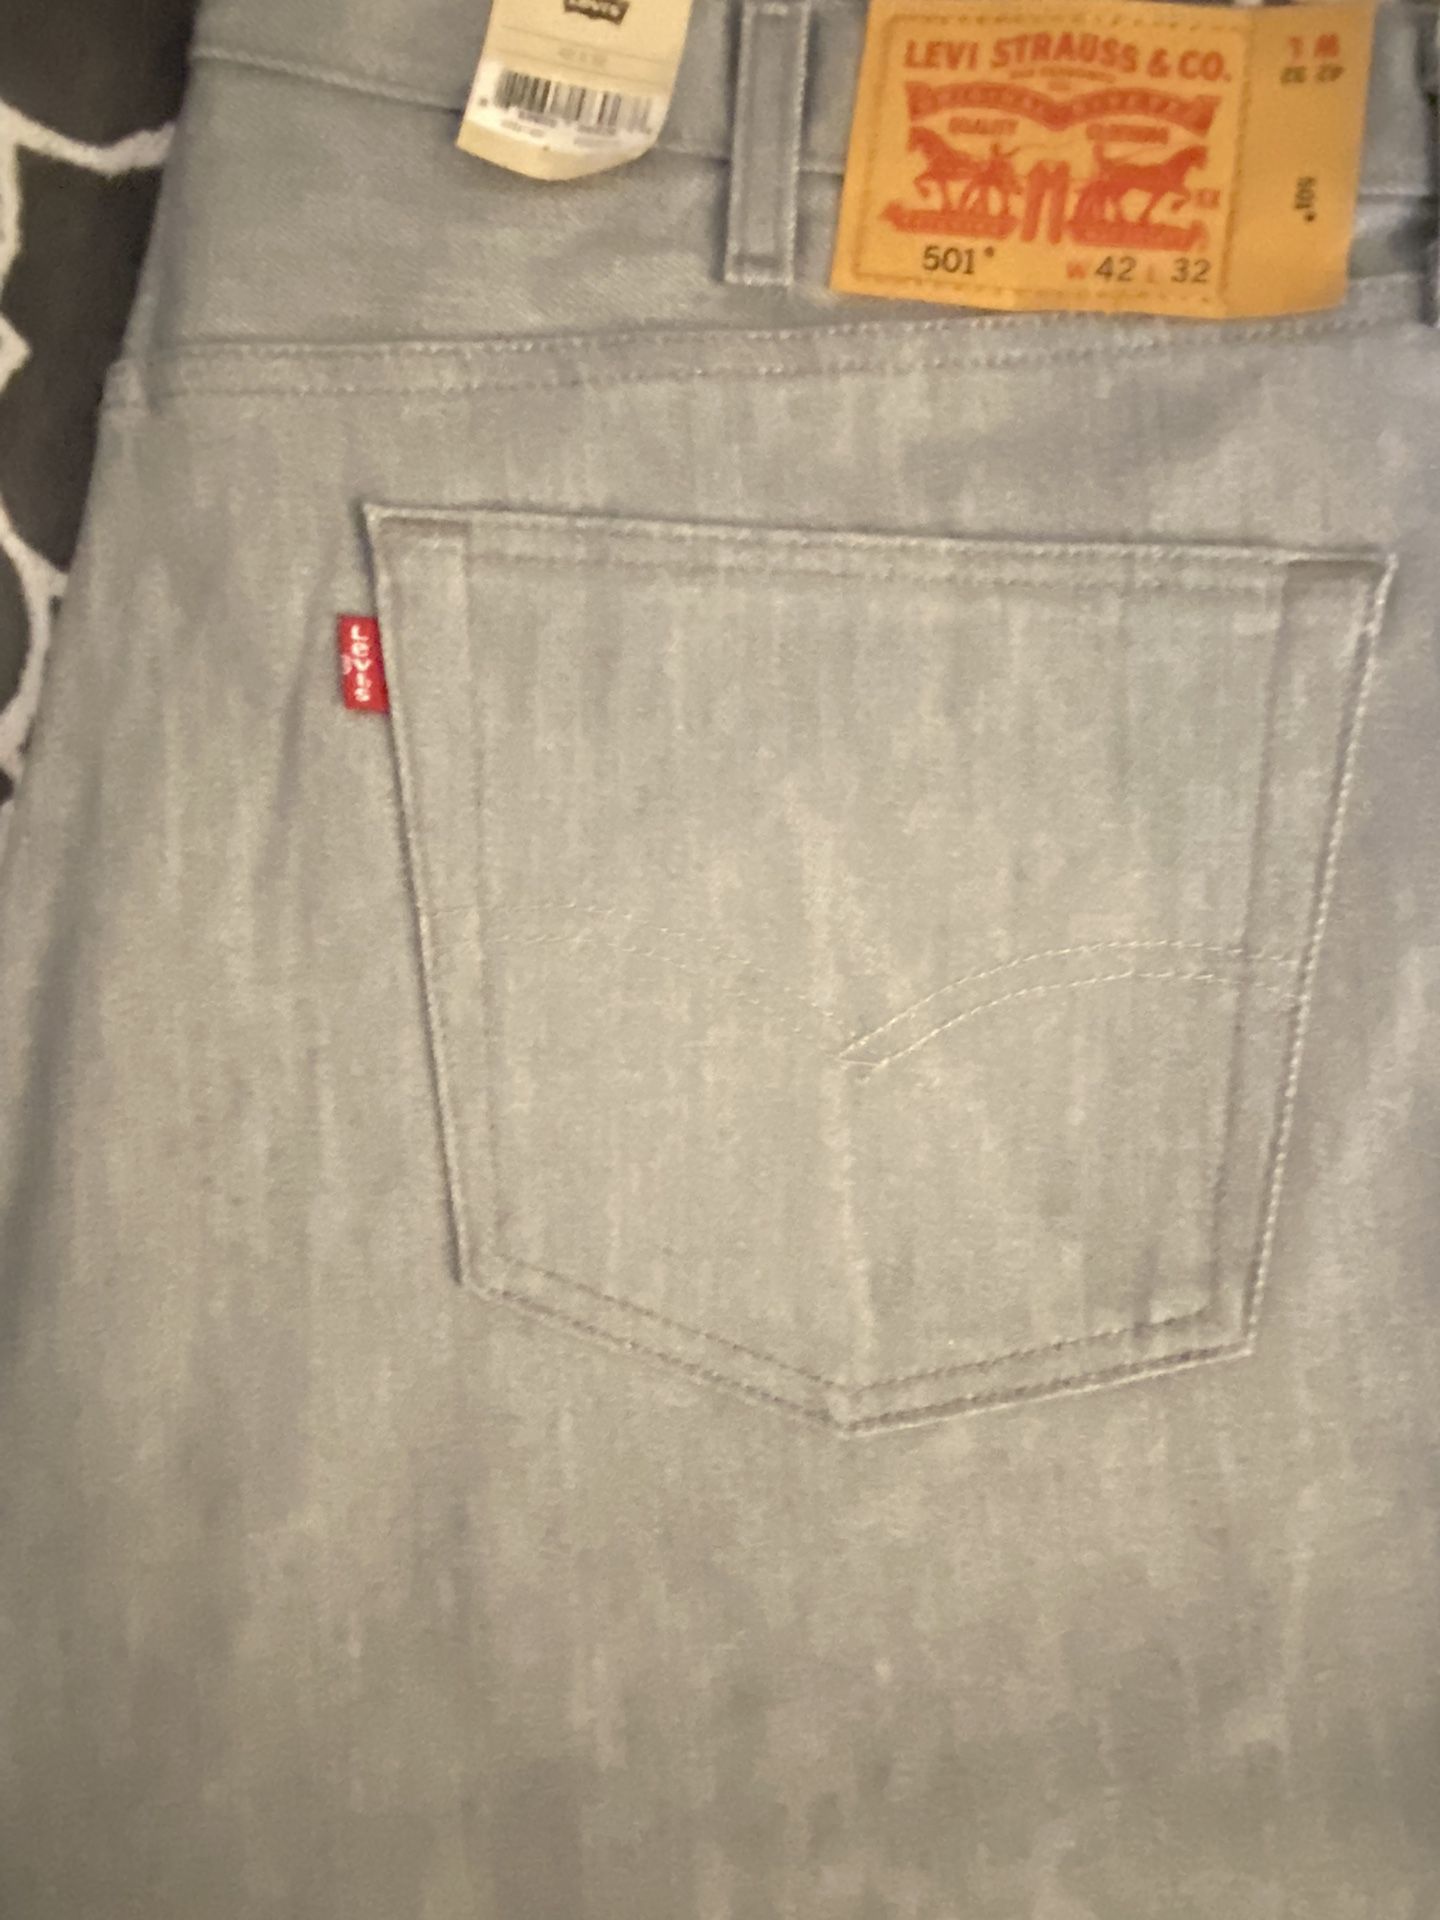 Brand New Levi’s 501s Light Grey,42x32 for Sale in Vista, CA - OfferUp